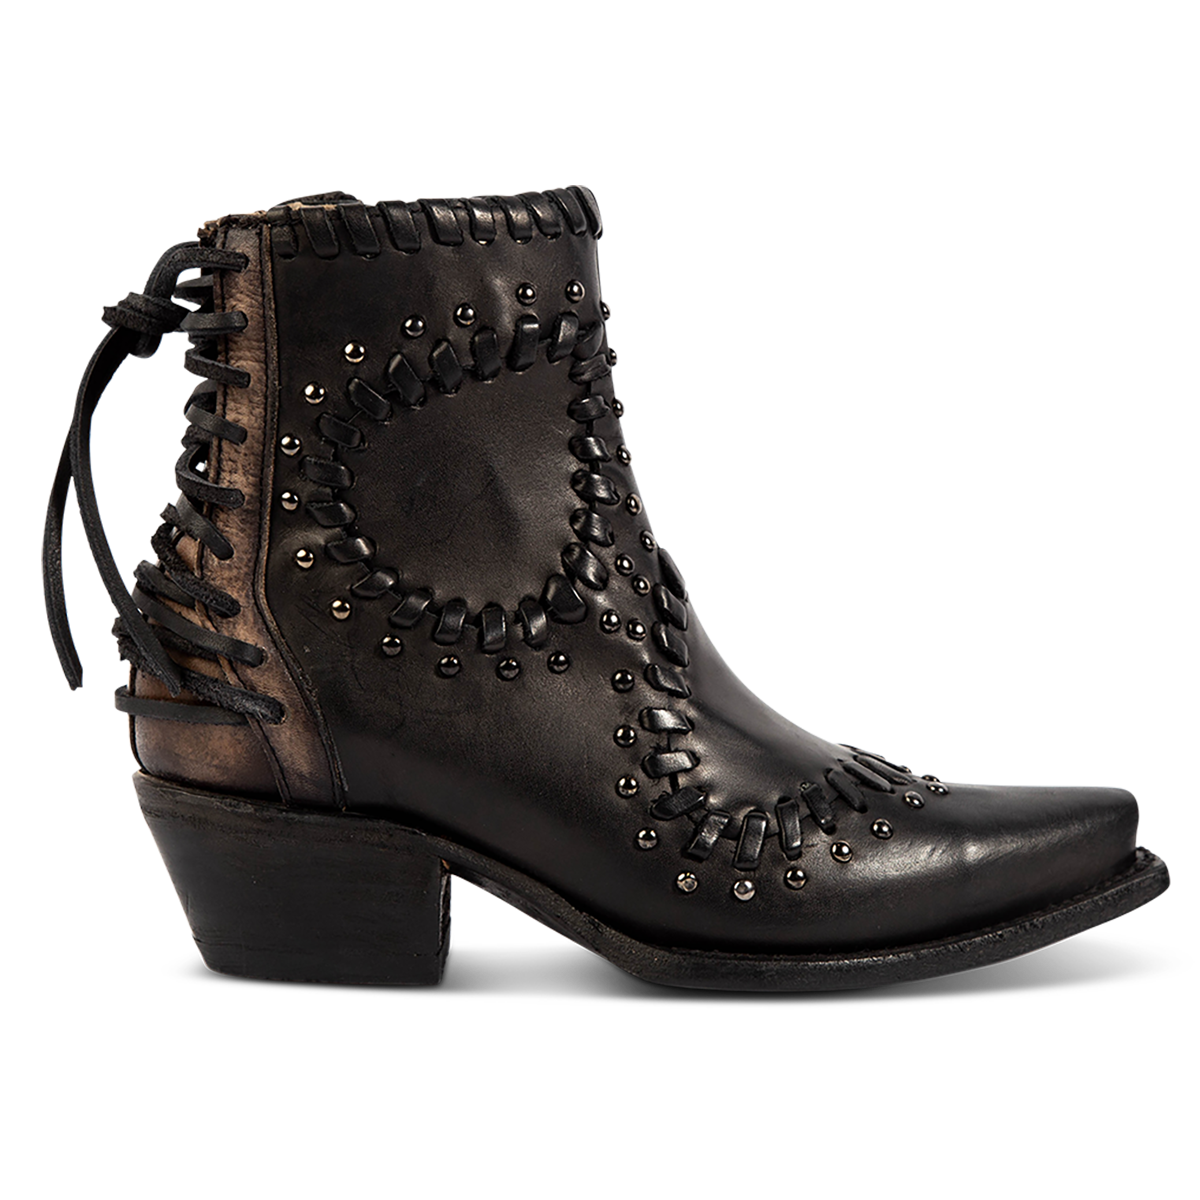 FREEBIRD women's Walker black leather bootie with asymmetrical whip stitch detailing, stud embellishments and back heel lacing